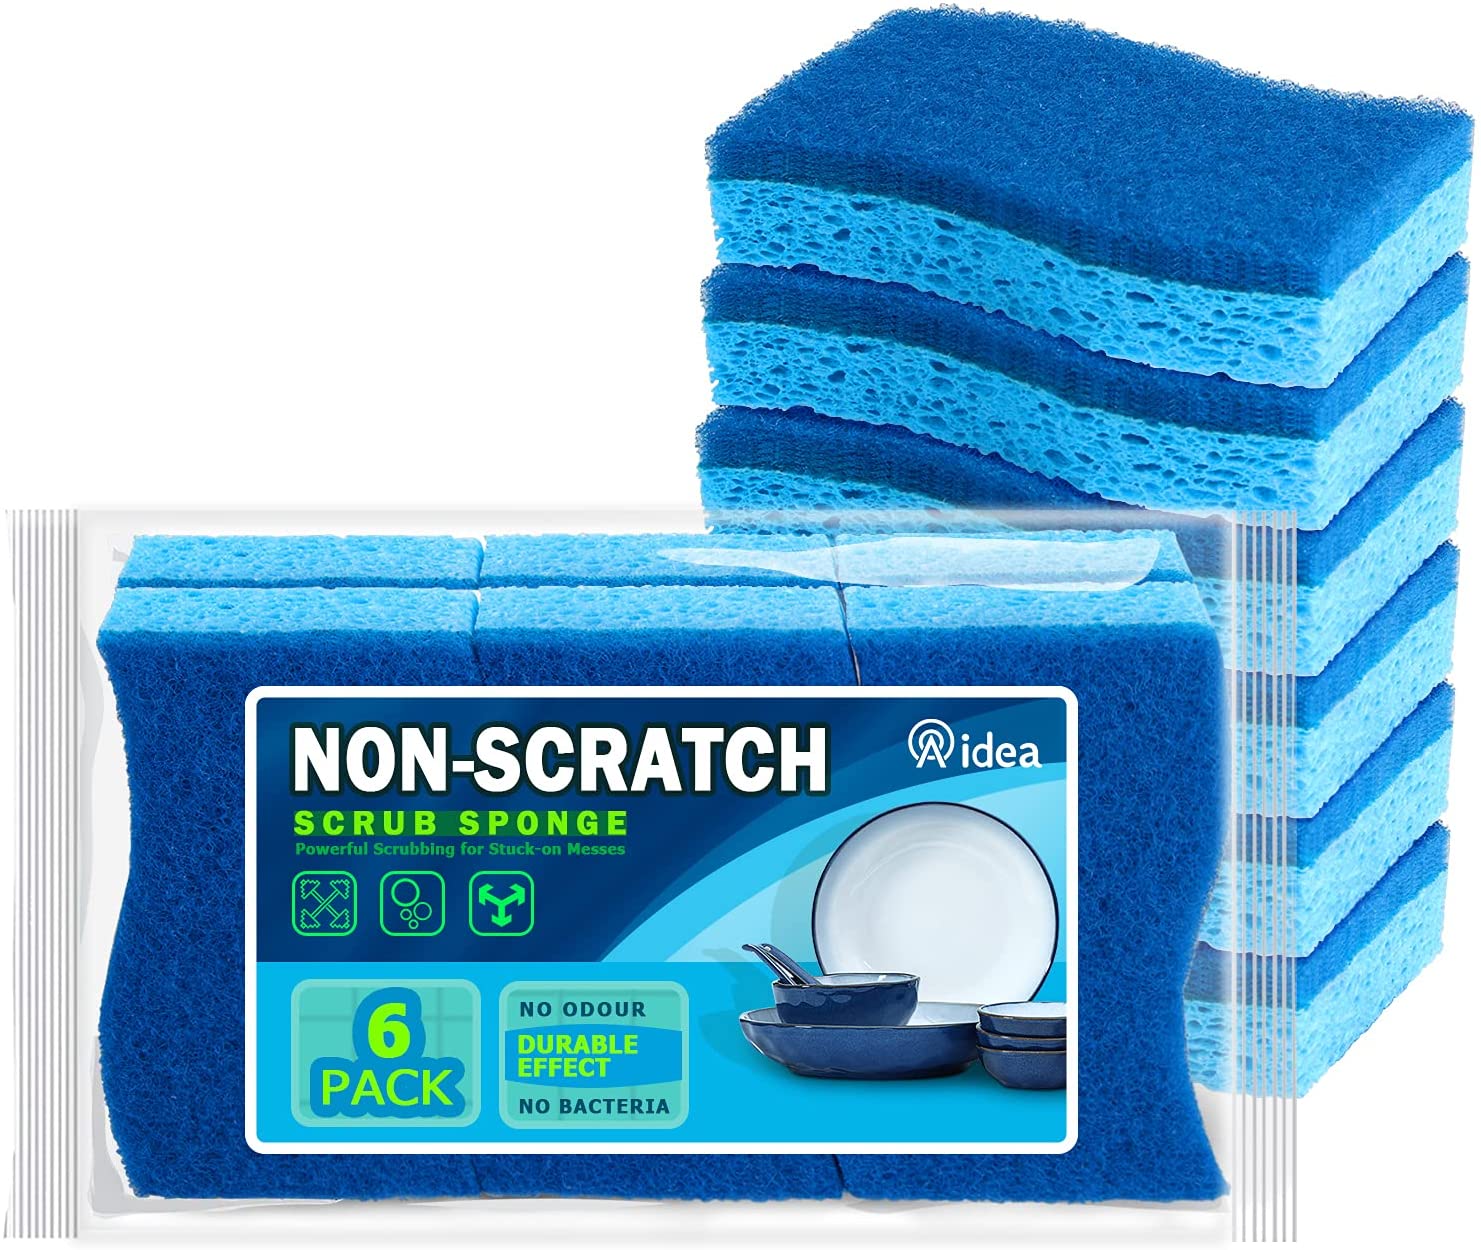 Non-Scratch Scrub Sponge-5Count, Sponges for Dishes, Cleaning Sponge,  Cleans Fast Without Scratching, Stands Up to Stuck-on Grime, Cleaning Power  for Everyday Jobs